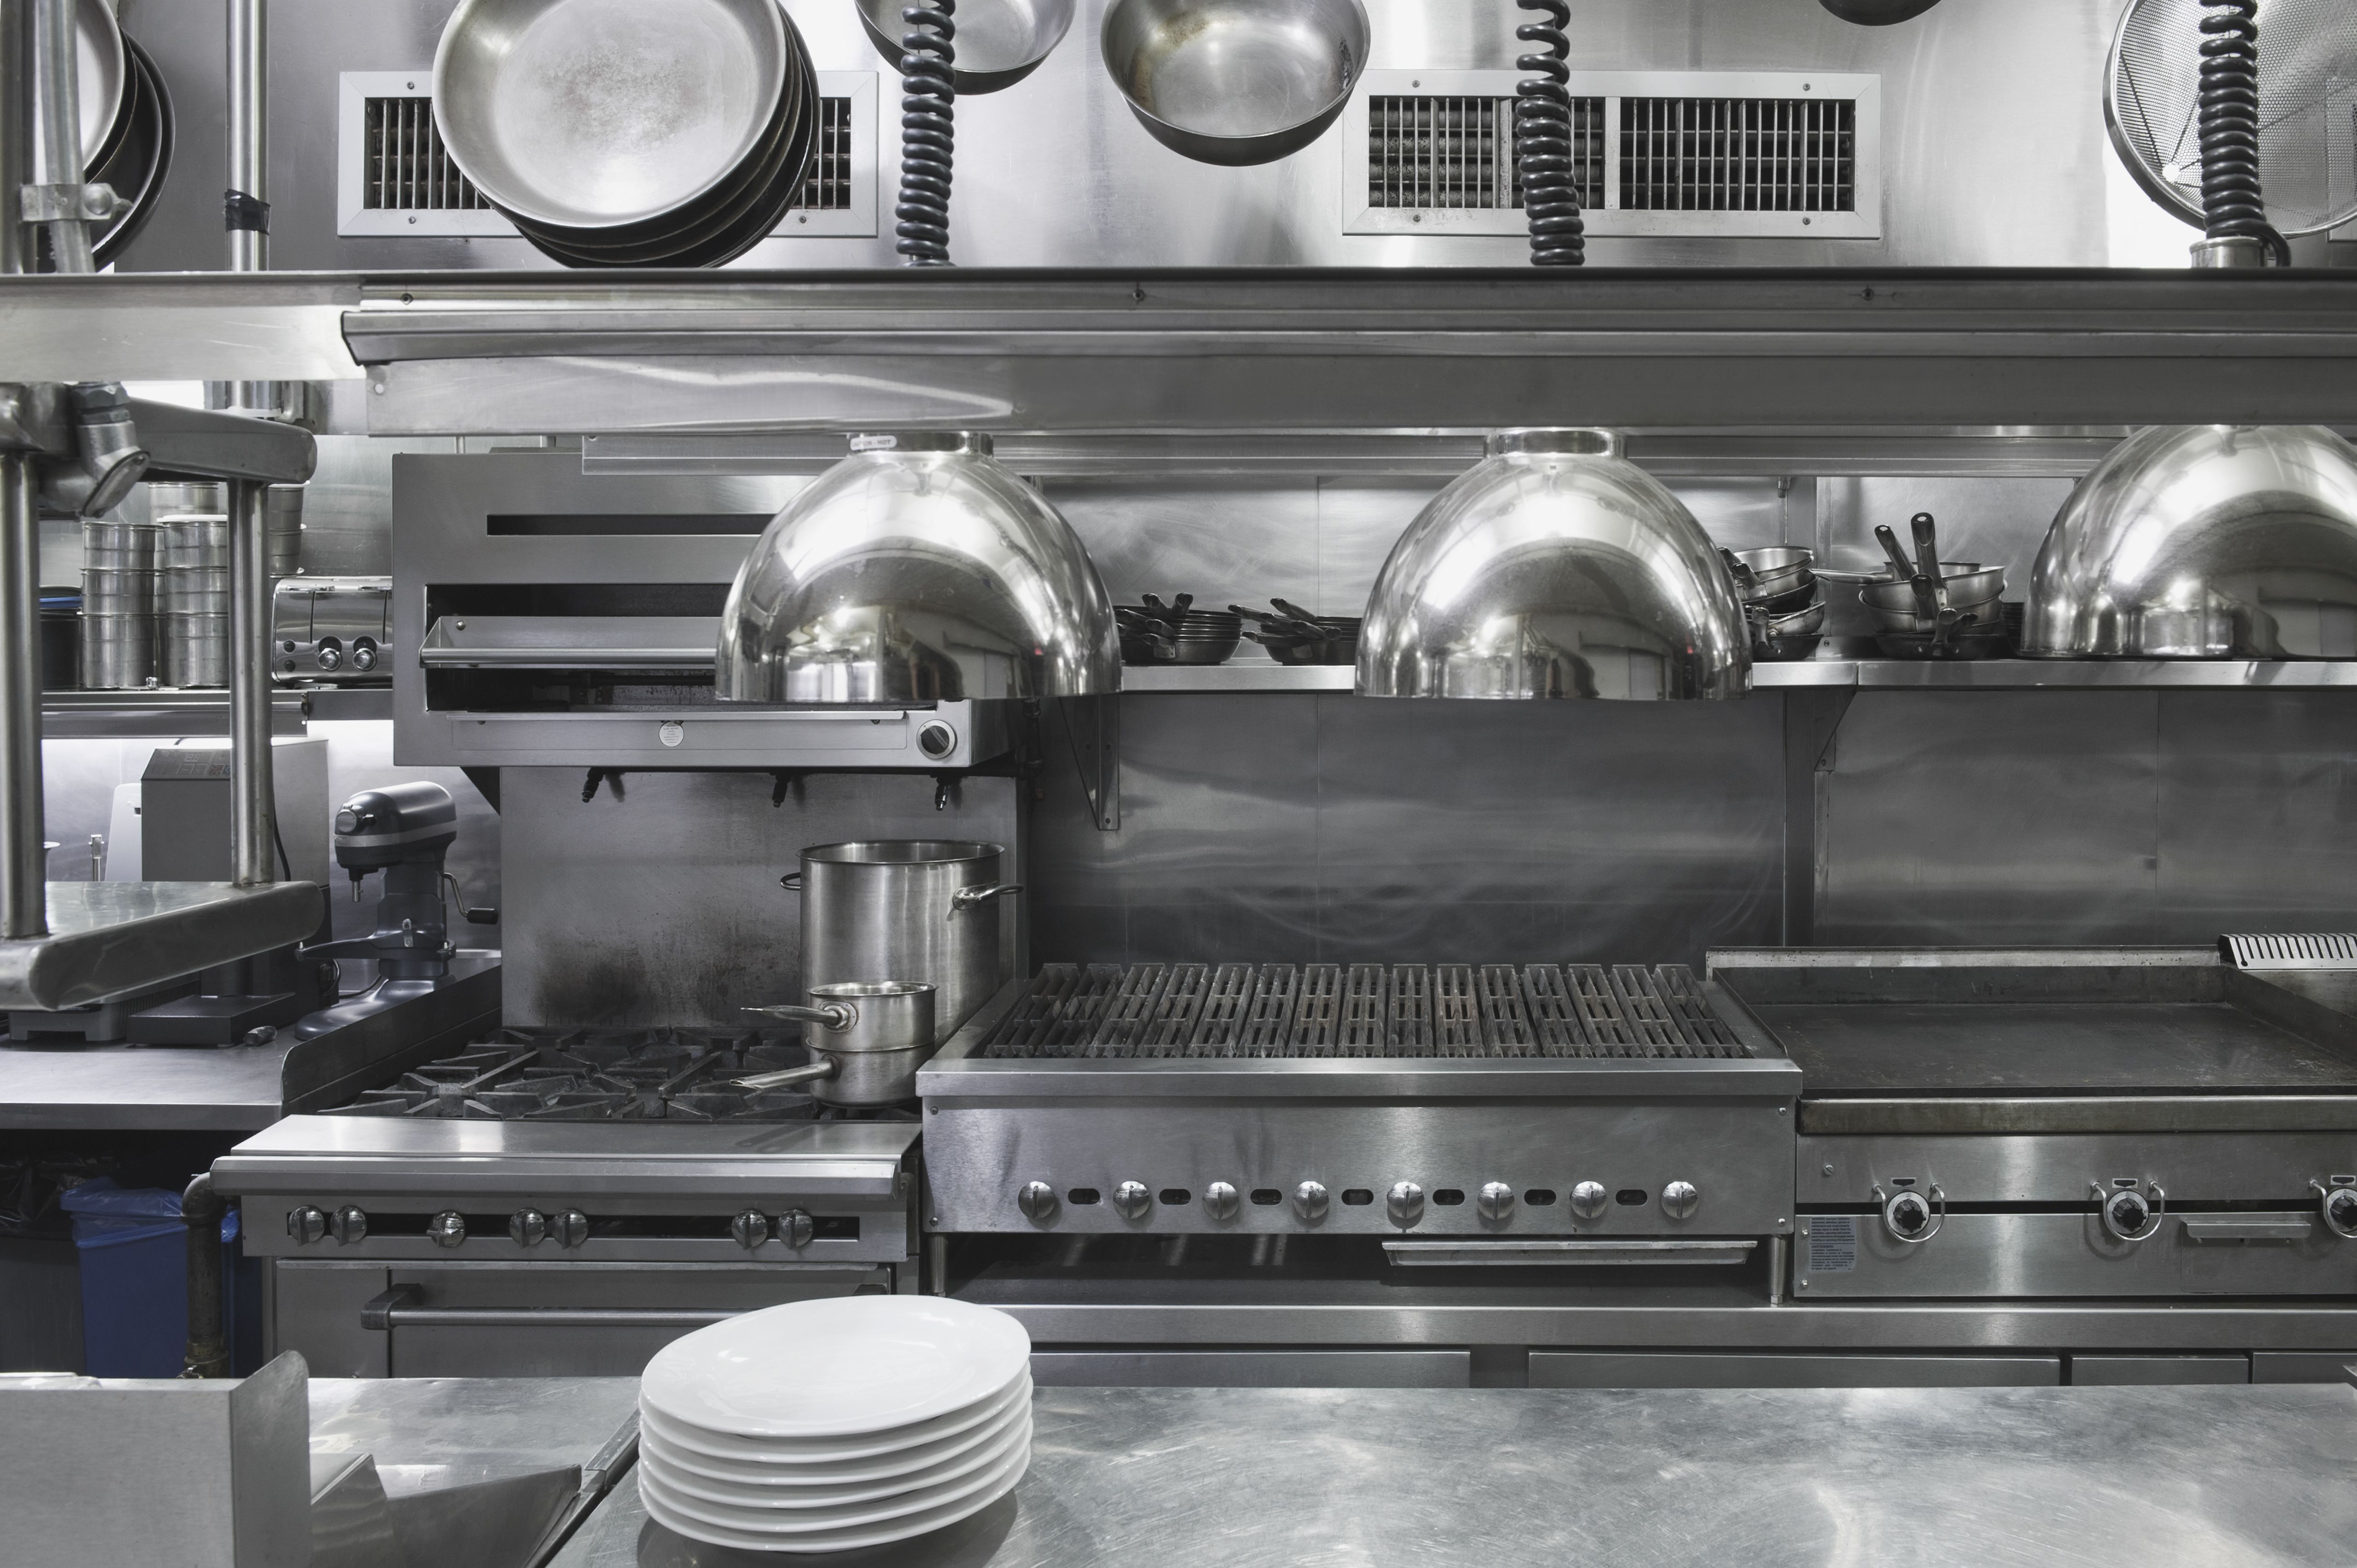 Restaurant Kitchen Planning and Equipping Basics